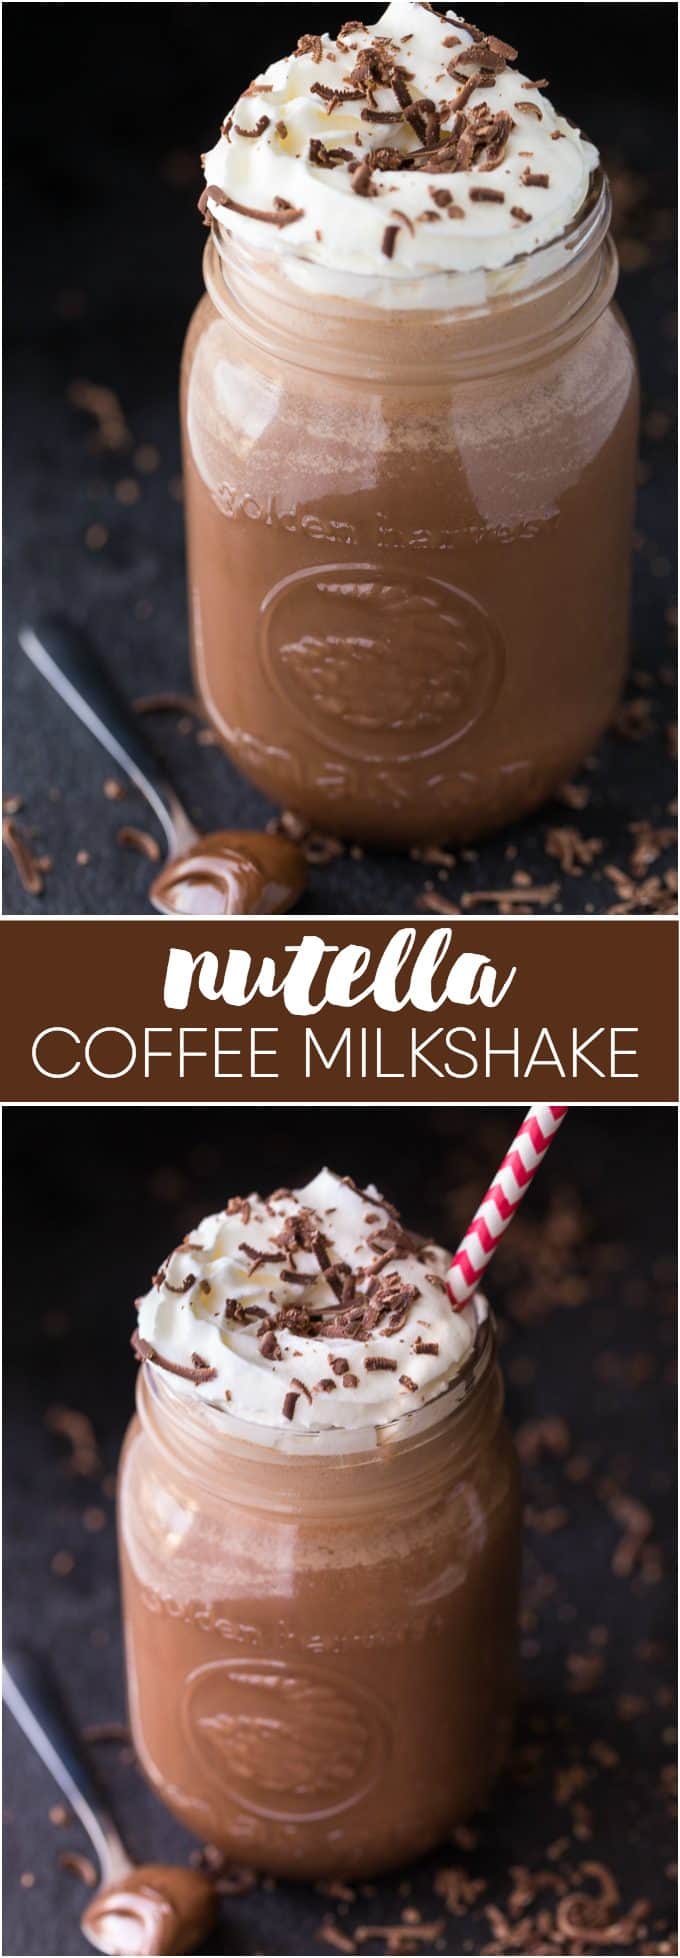 Nutella Coffee Milkshake - Perfectly sweet, chocolatey with a hint of nuttiness! A cold and refreshing way to get your caffeine fix.